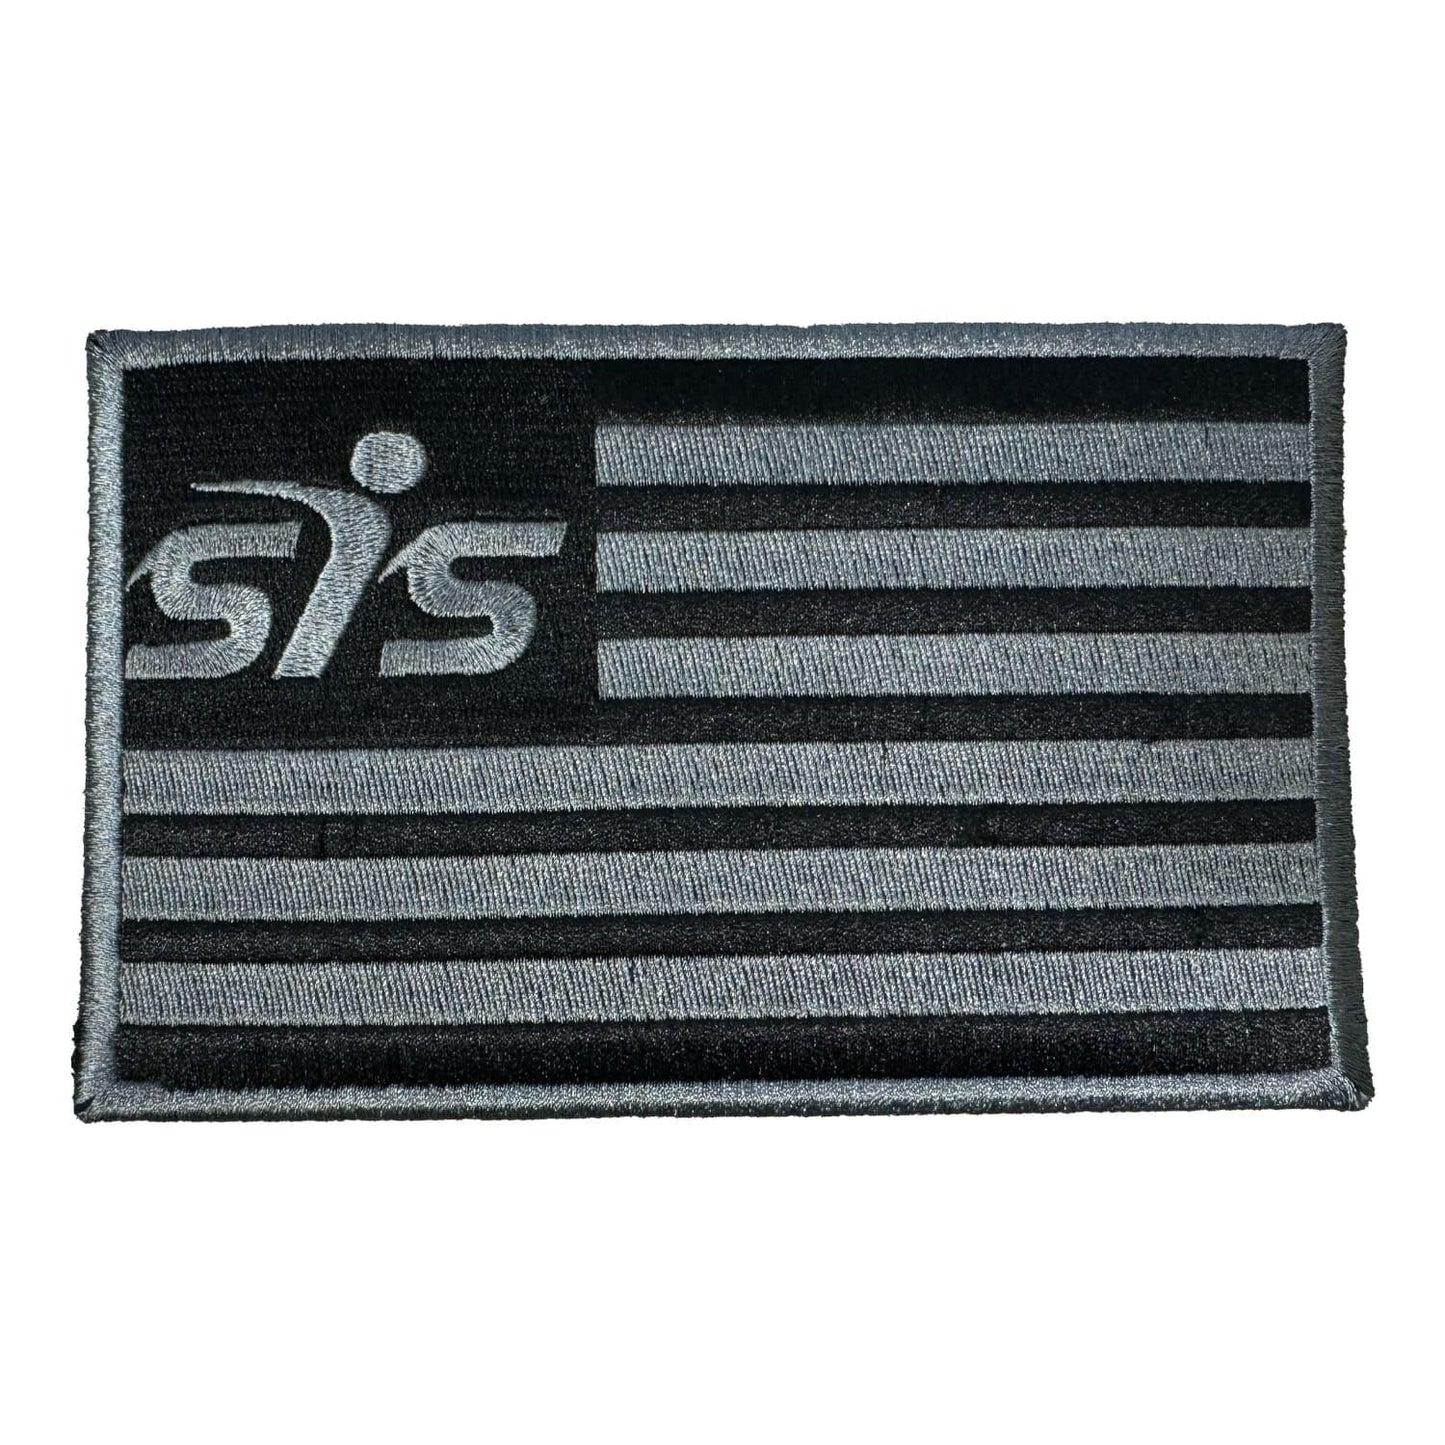 Smash Ops Flag Patch